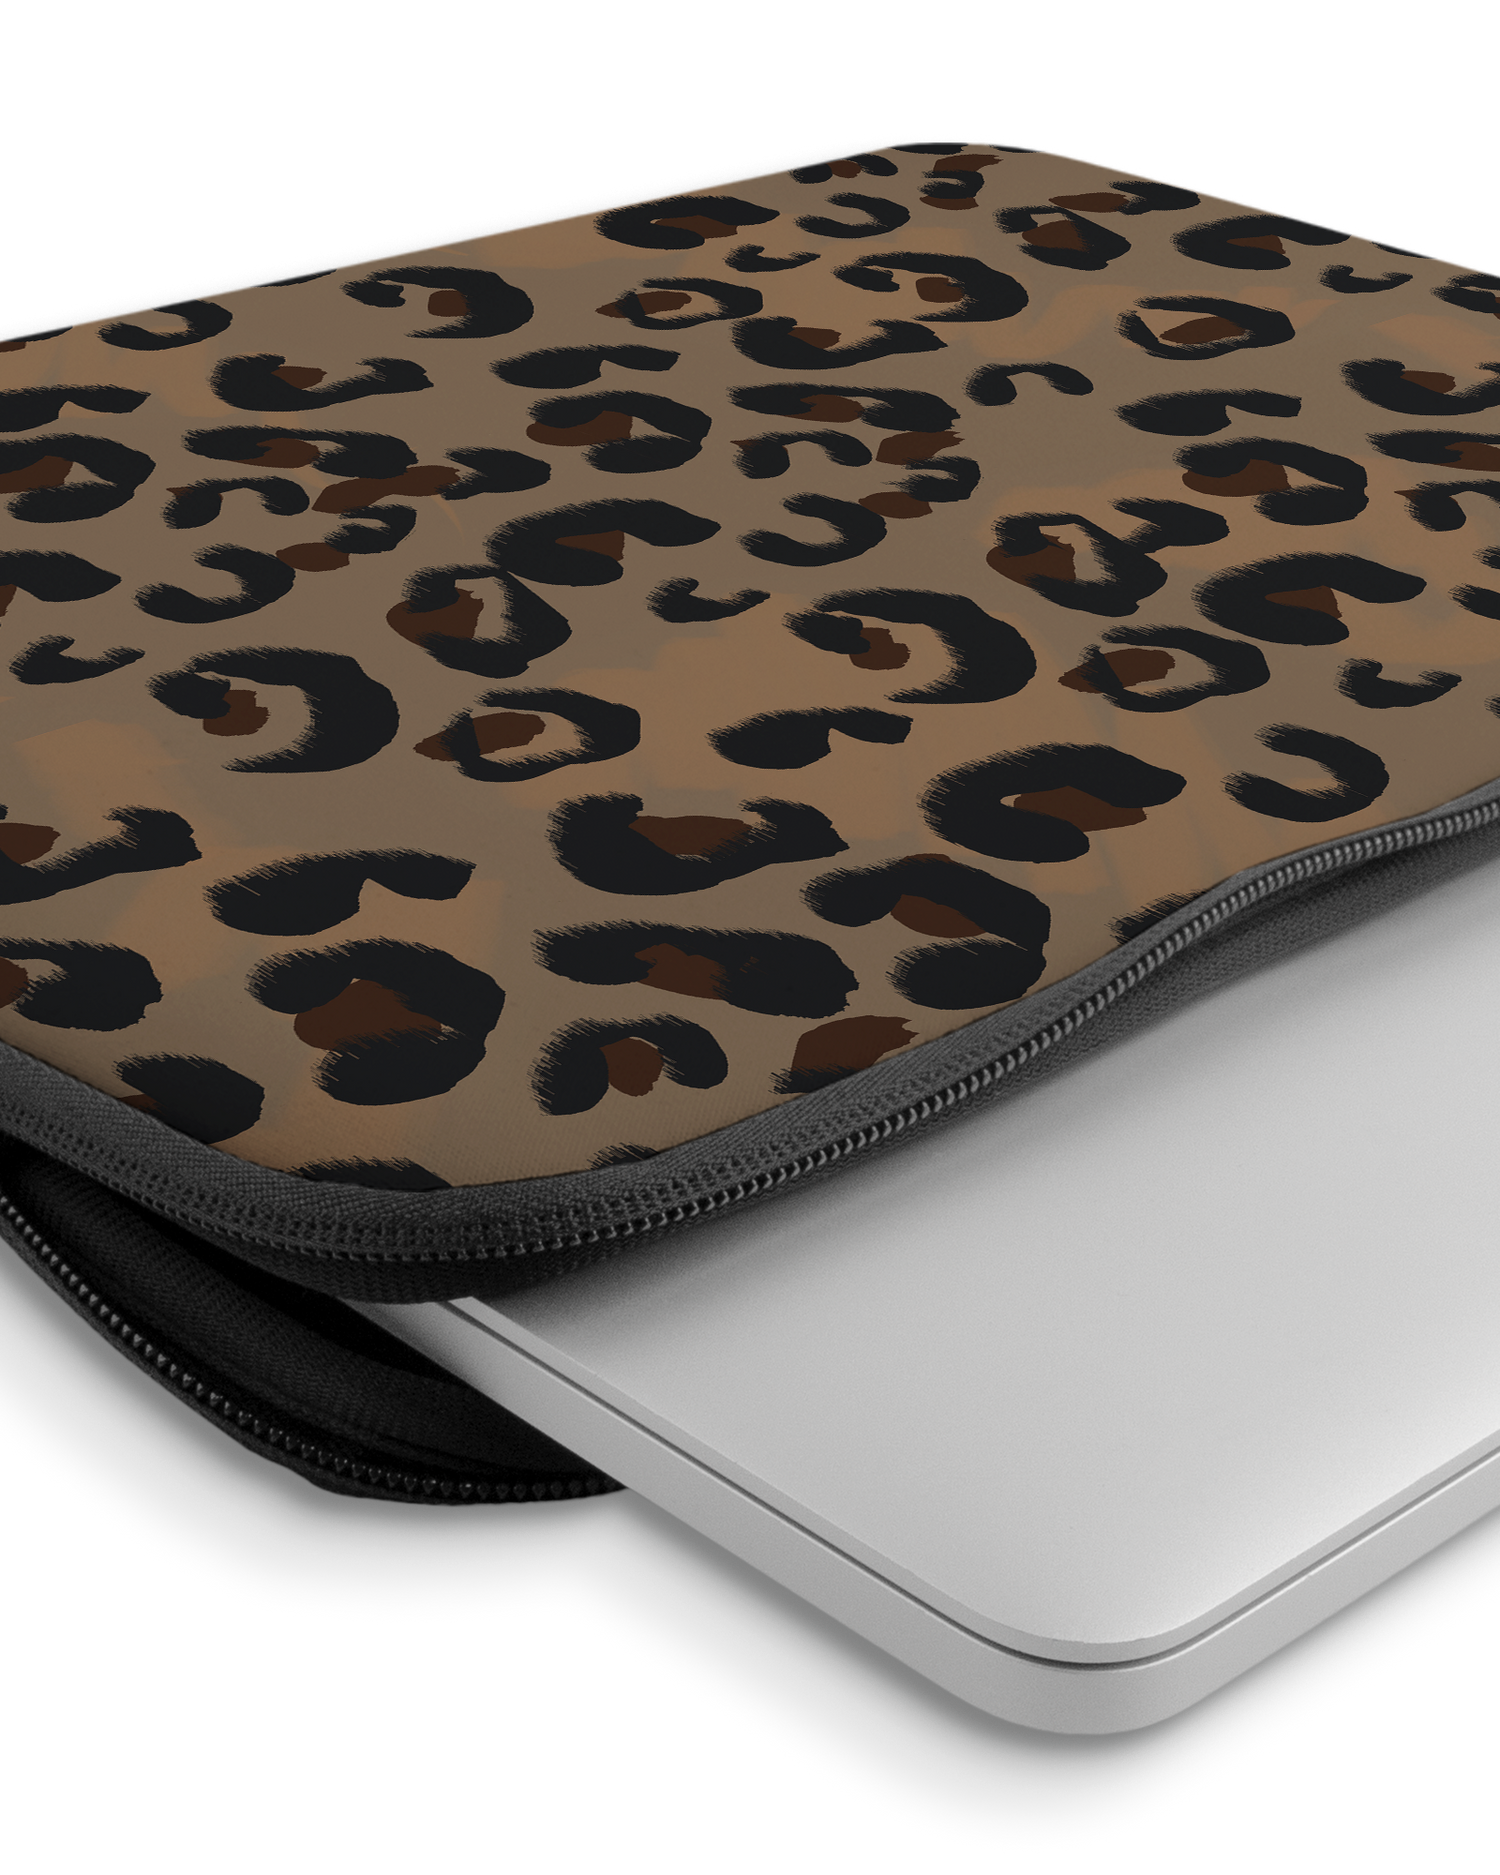 Leopard Repeat Laptop Case 14-15 inch with device inside